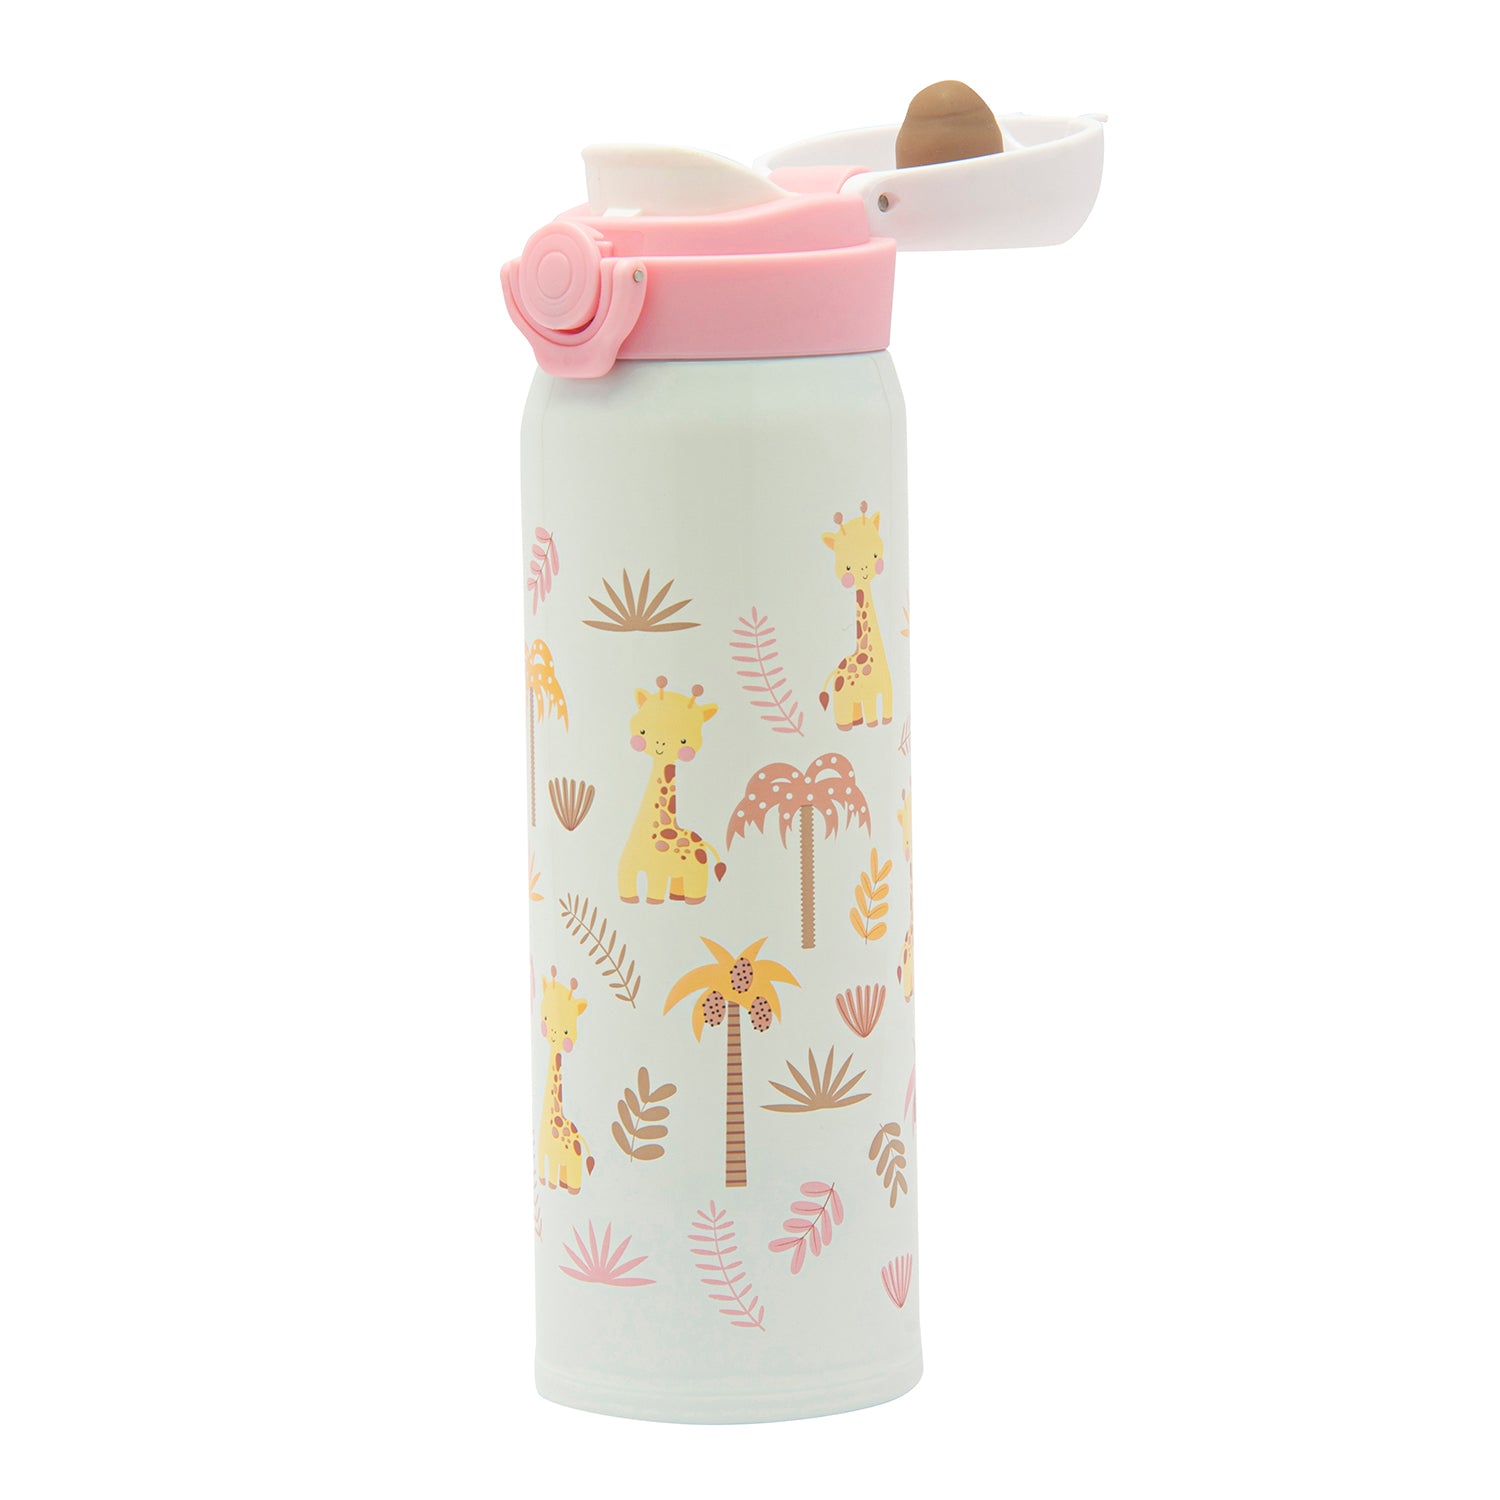 Giraffes in the Wild Pink 500 ml Stainless Steel Flask - Baby Moo